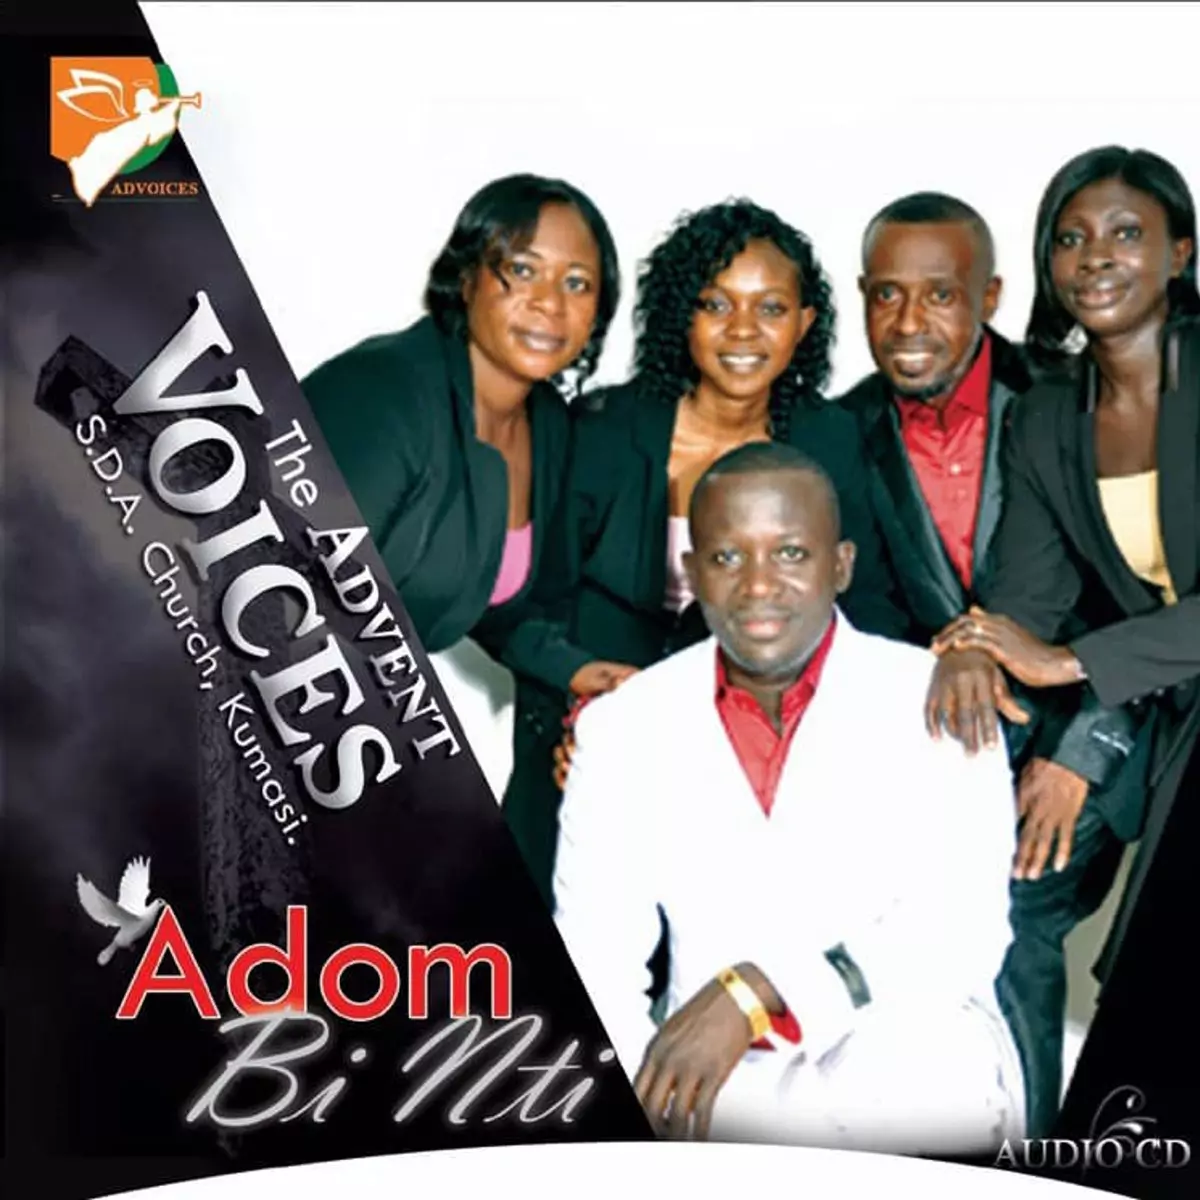 Adom Bi Nti by The Advent Voices on Apple Music